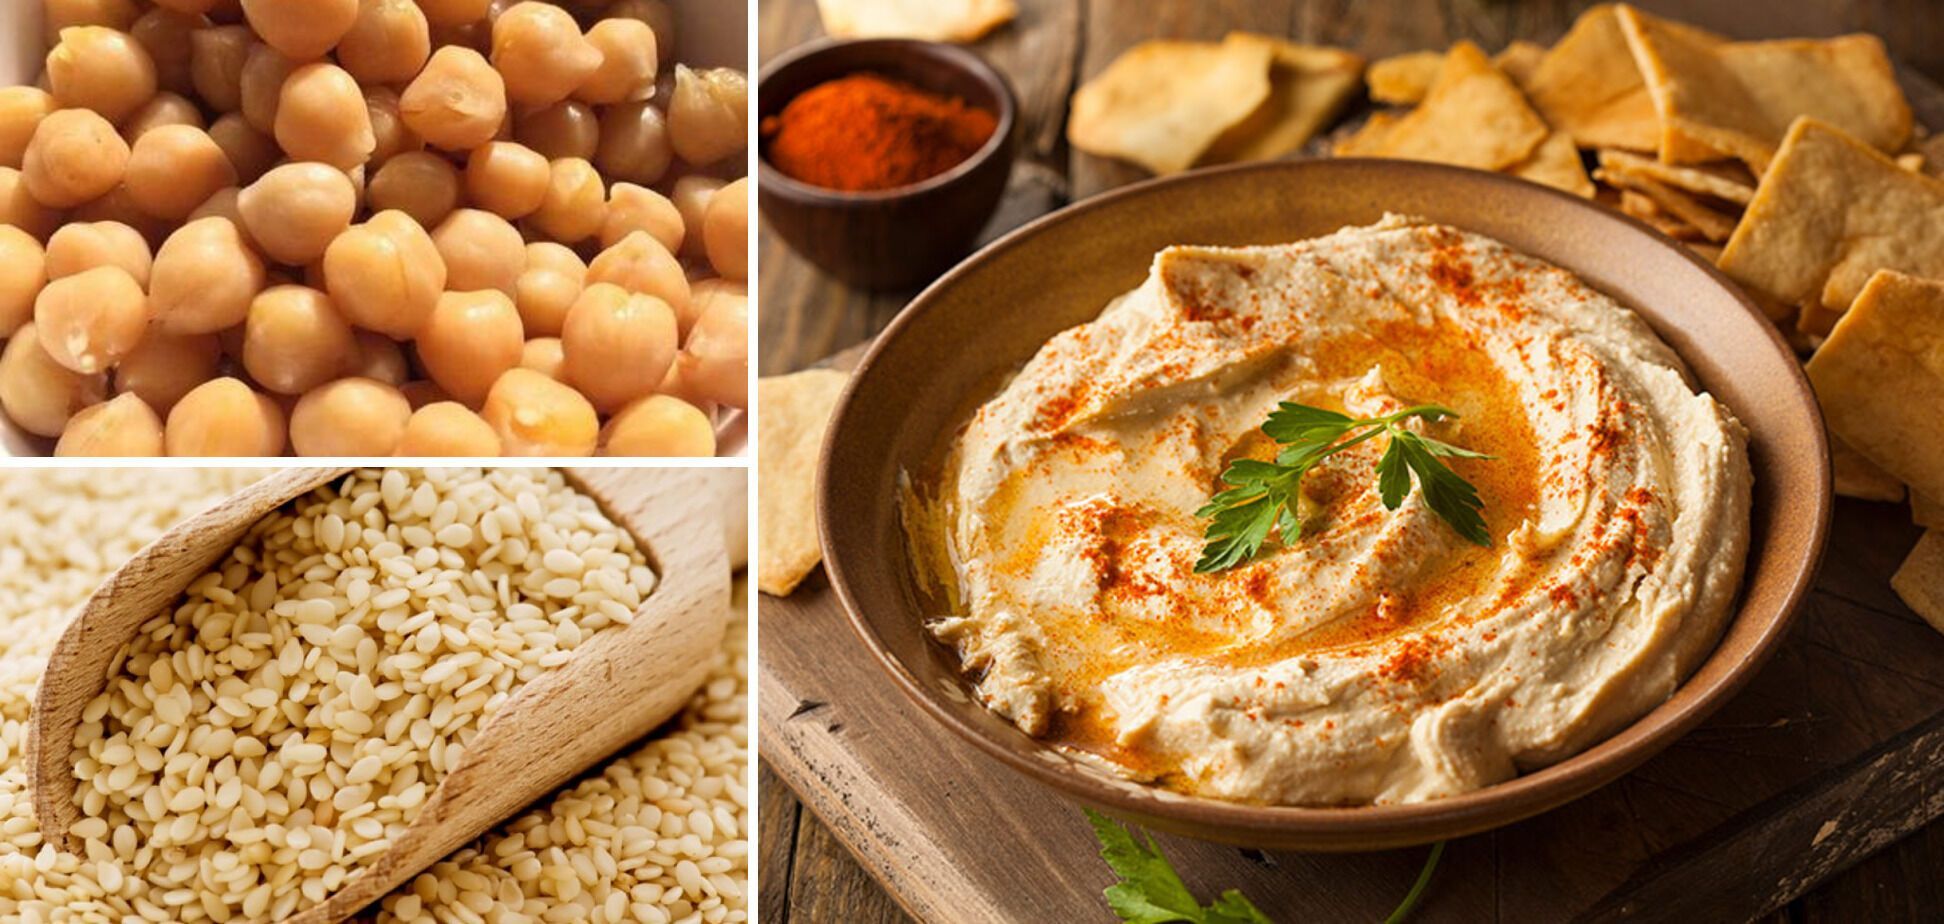 How to make delicious hummus at home